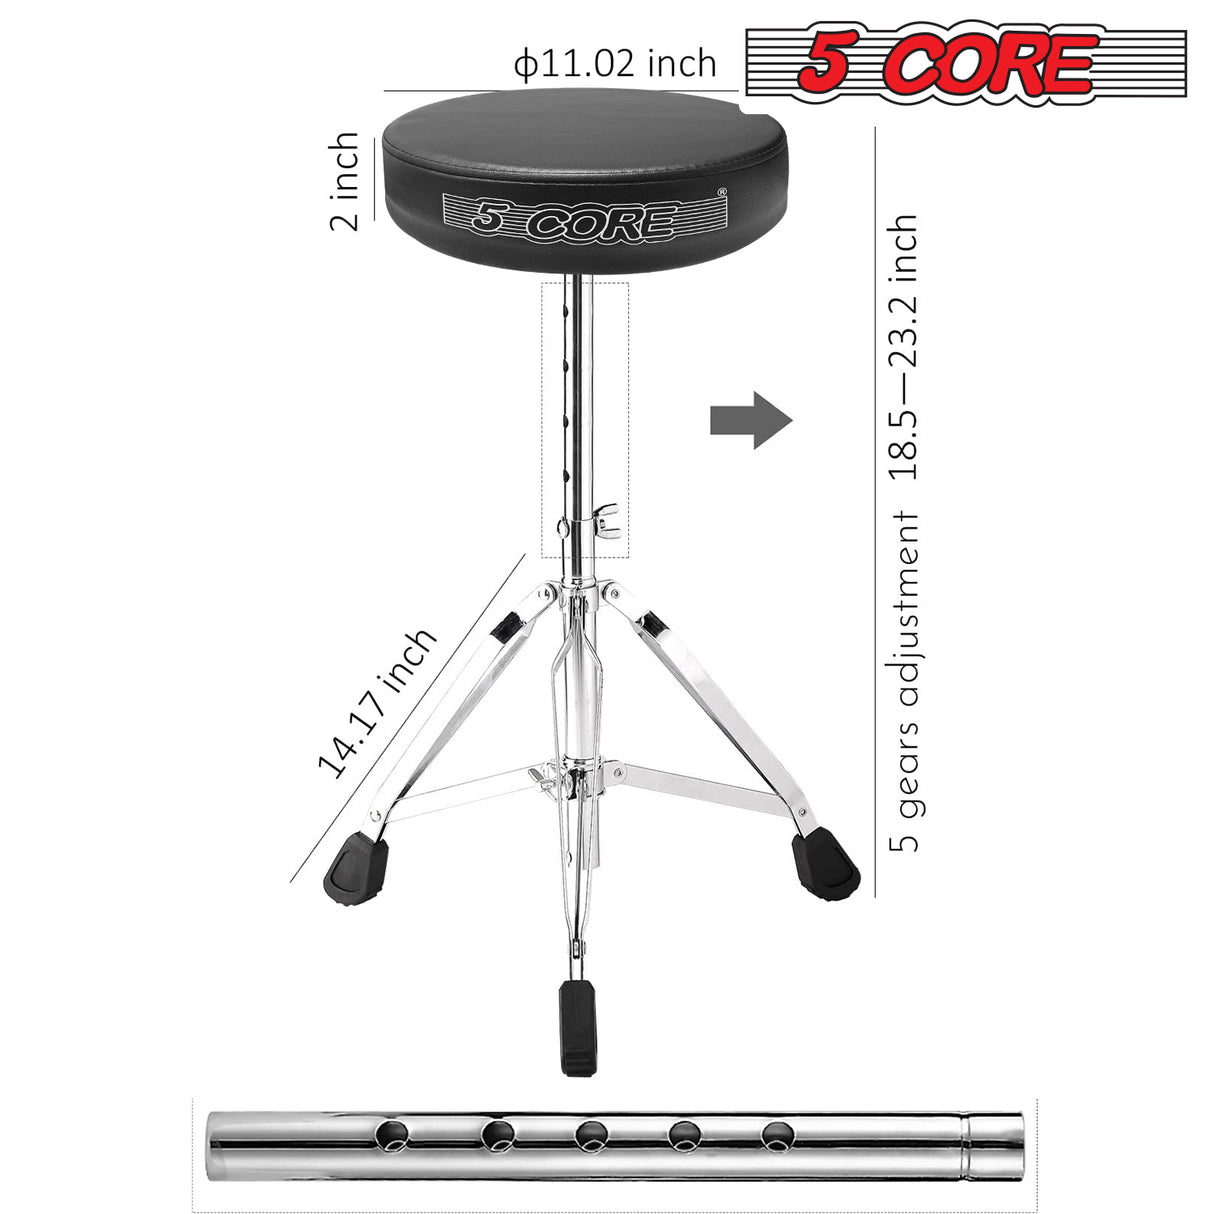 5 Core Drum Throne Black| Height Adjustable Padded Seat Drum Stool| Folding Portable Drummer Throne with Anti-Slip Feet| with two Drumsticks, Drum Chair for Kids and Adults- DS CH BLK